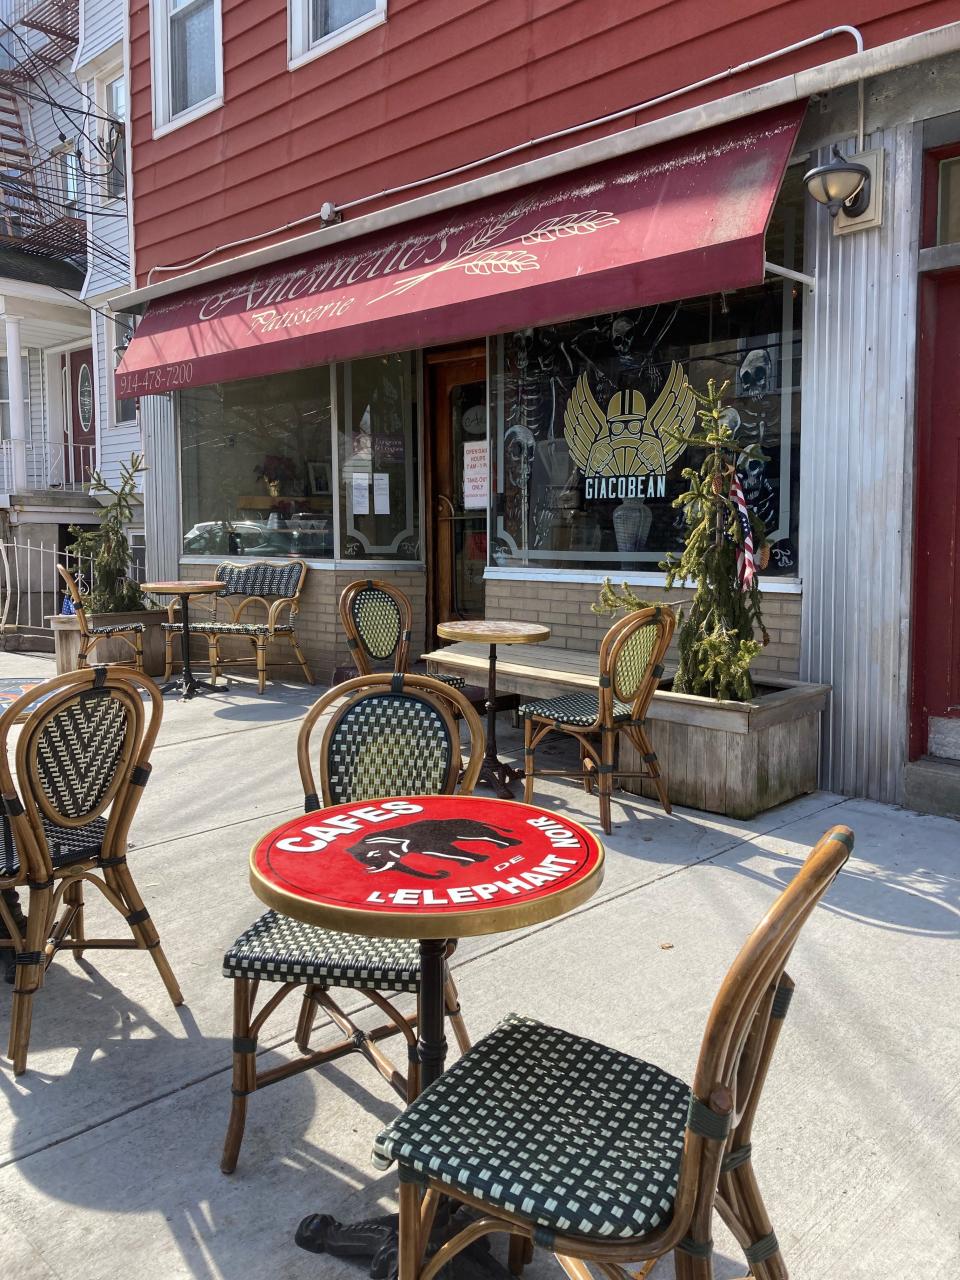 Antoinette's Patisserie in Hastings-on-Hudson feels like a touch of Paris with its alfresco seating and French croissants.